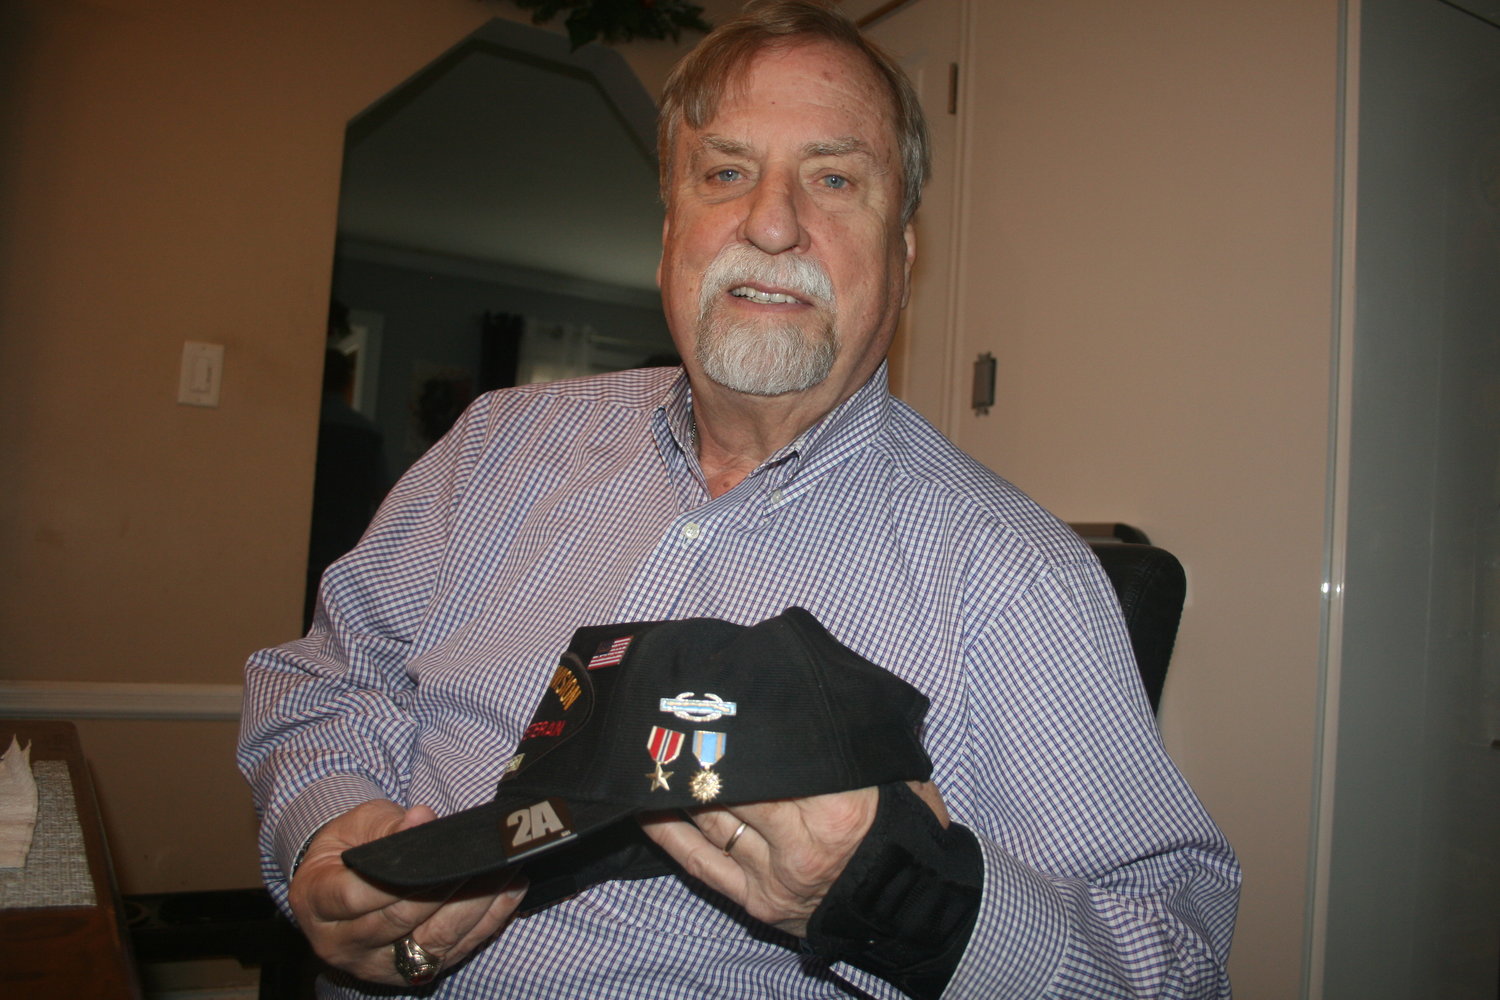 Carl Johnson with medals he received for his service during the Vietnam War.